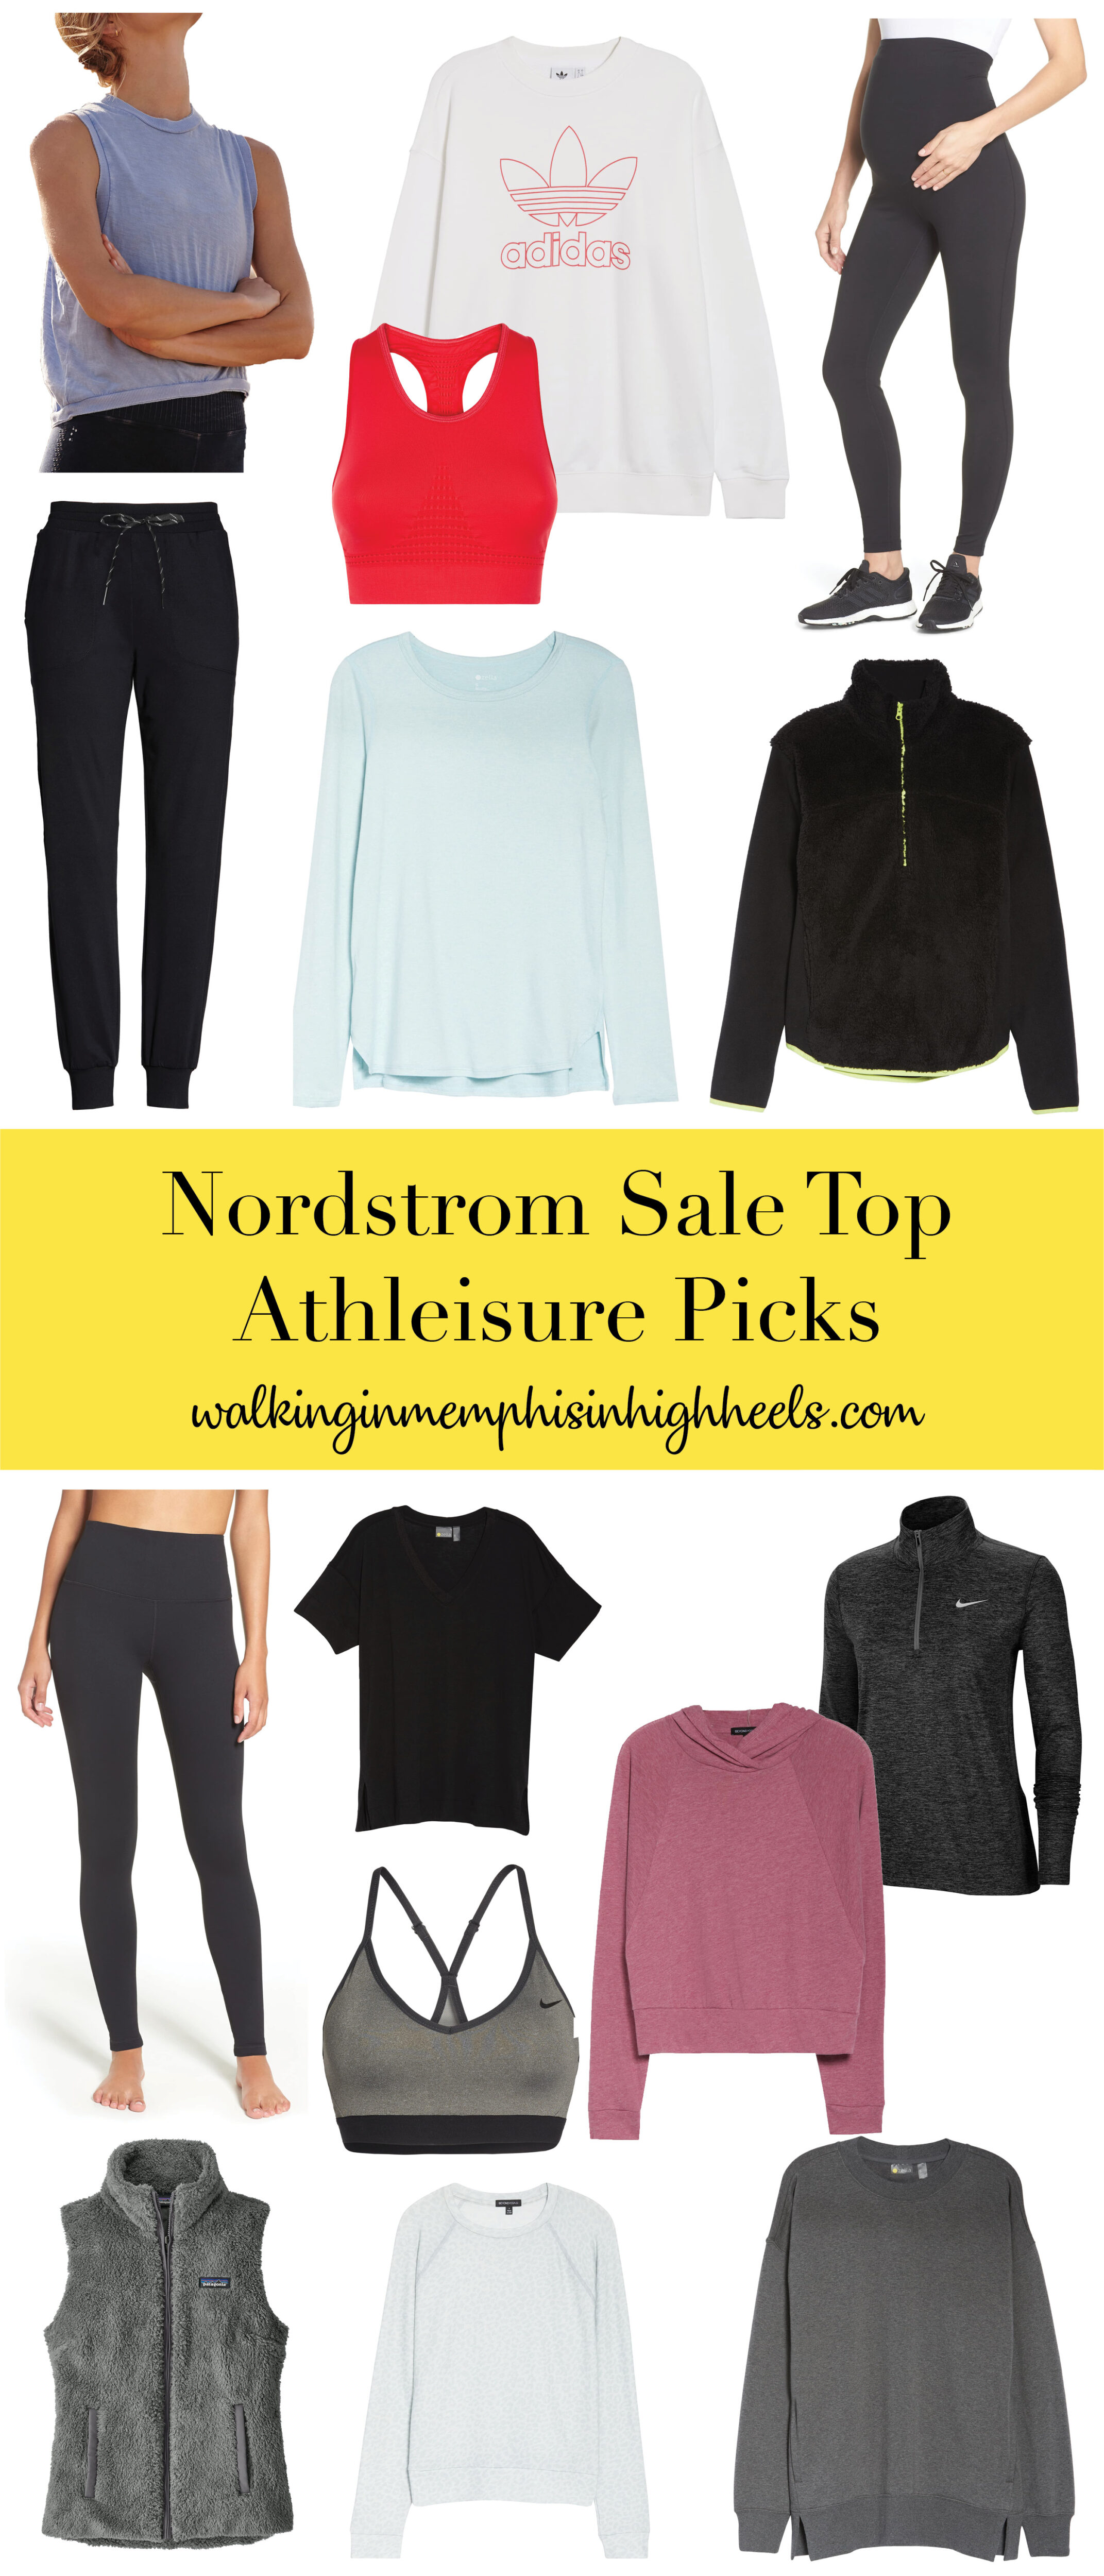 Nordstrom Anniversary Sale: Top Athleisure Picks for Women featured by top Memphis fashion and fitness blogger, Walking in Memphis in High Heels.